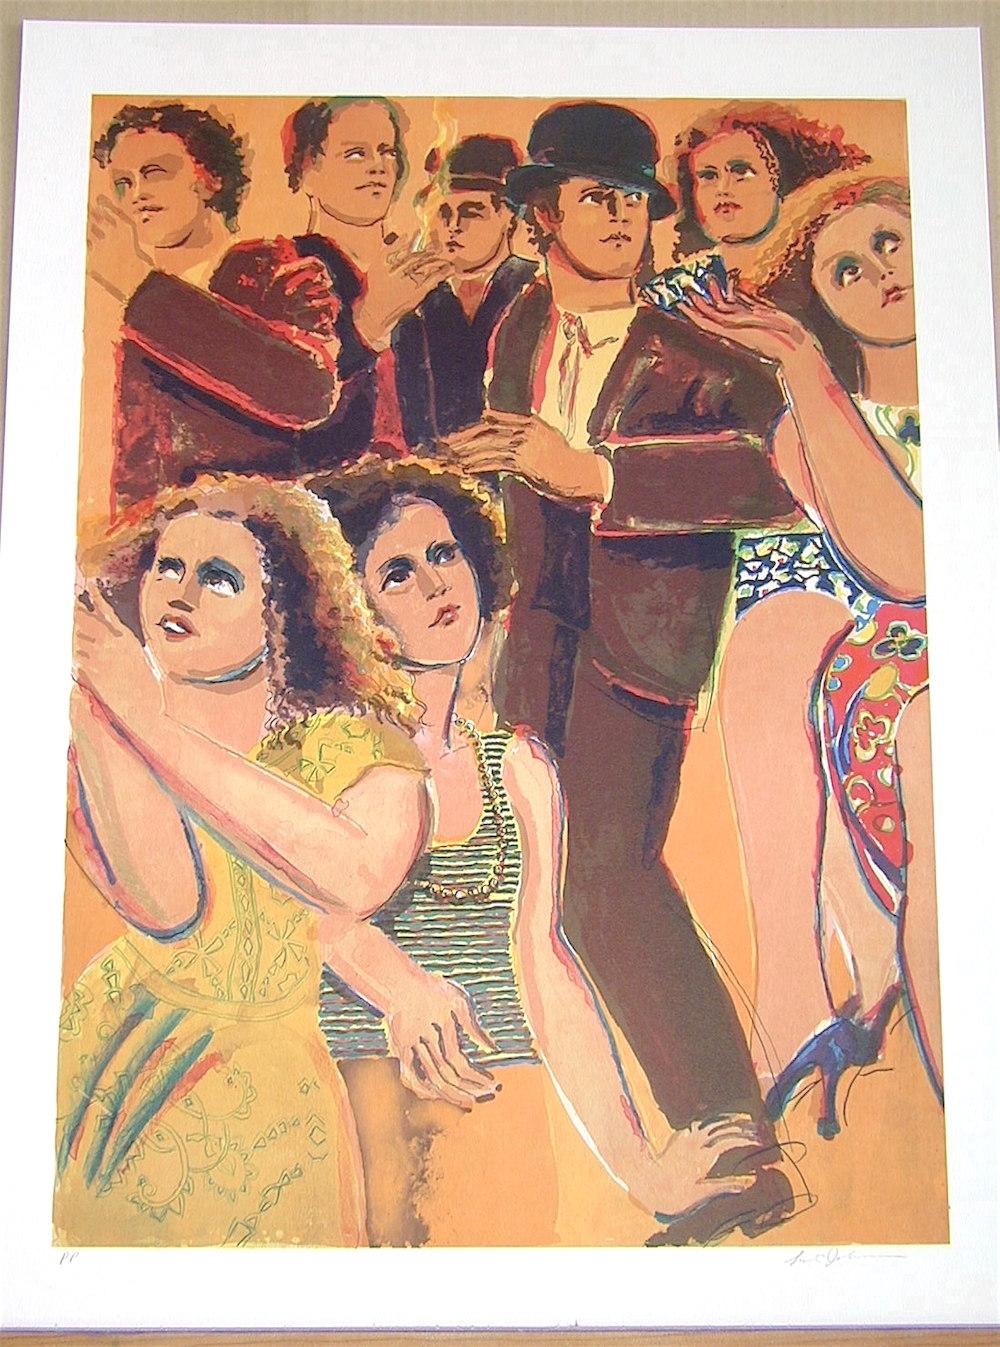 STREET SCENE is an original hand drawn lithograph by the NY painter, Lester Johnson. Printed using hand lithography techniques on archival ARCHES paper 100% acid free. In STREET SCENE a group of mannequin like male and female figures are looking